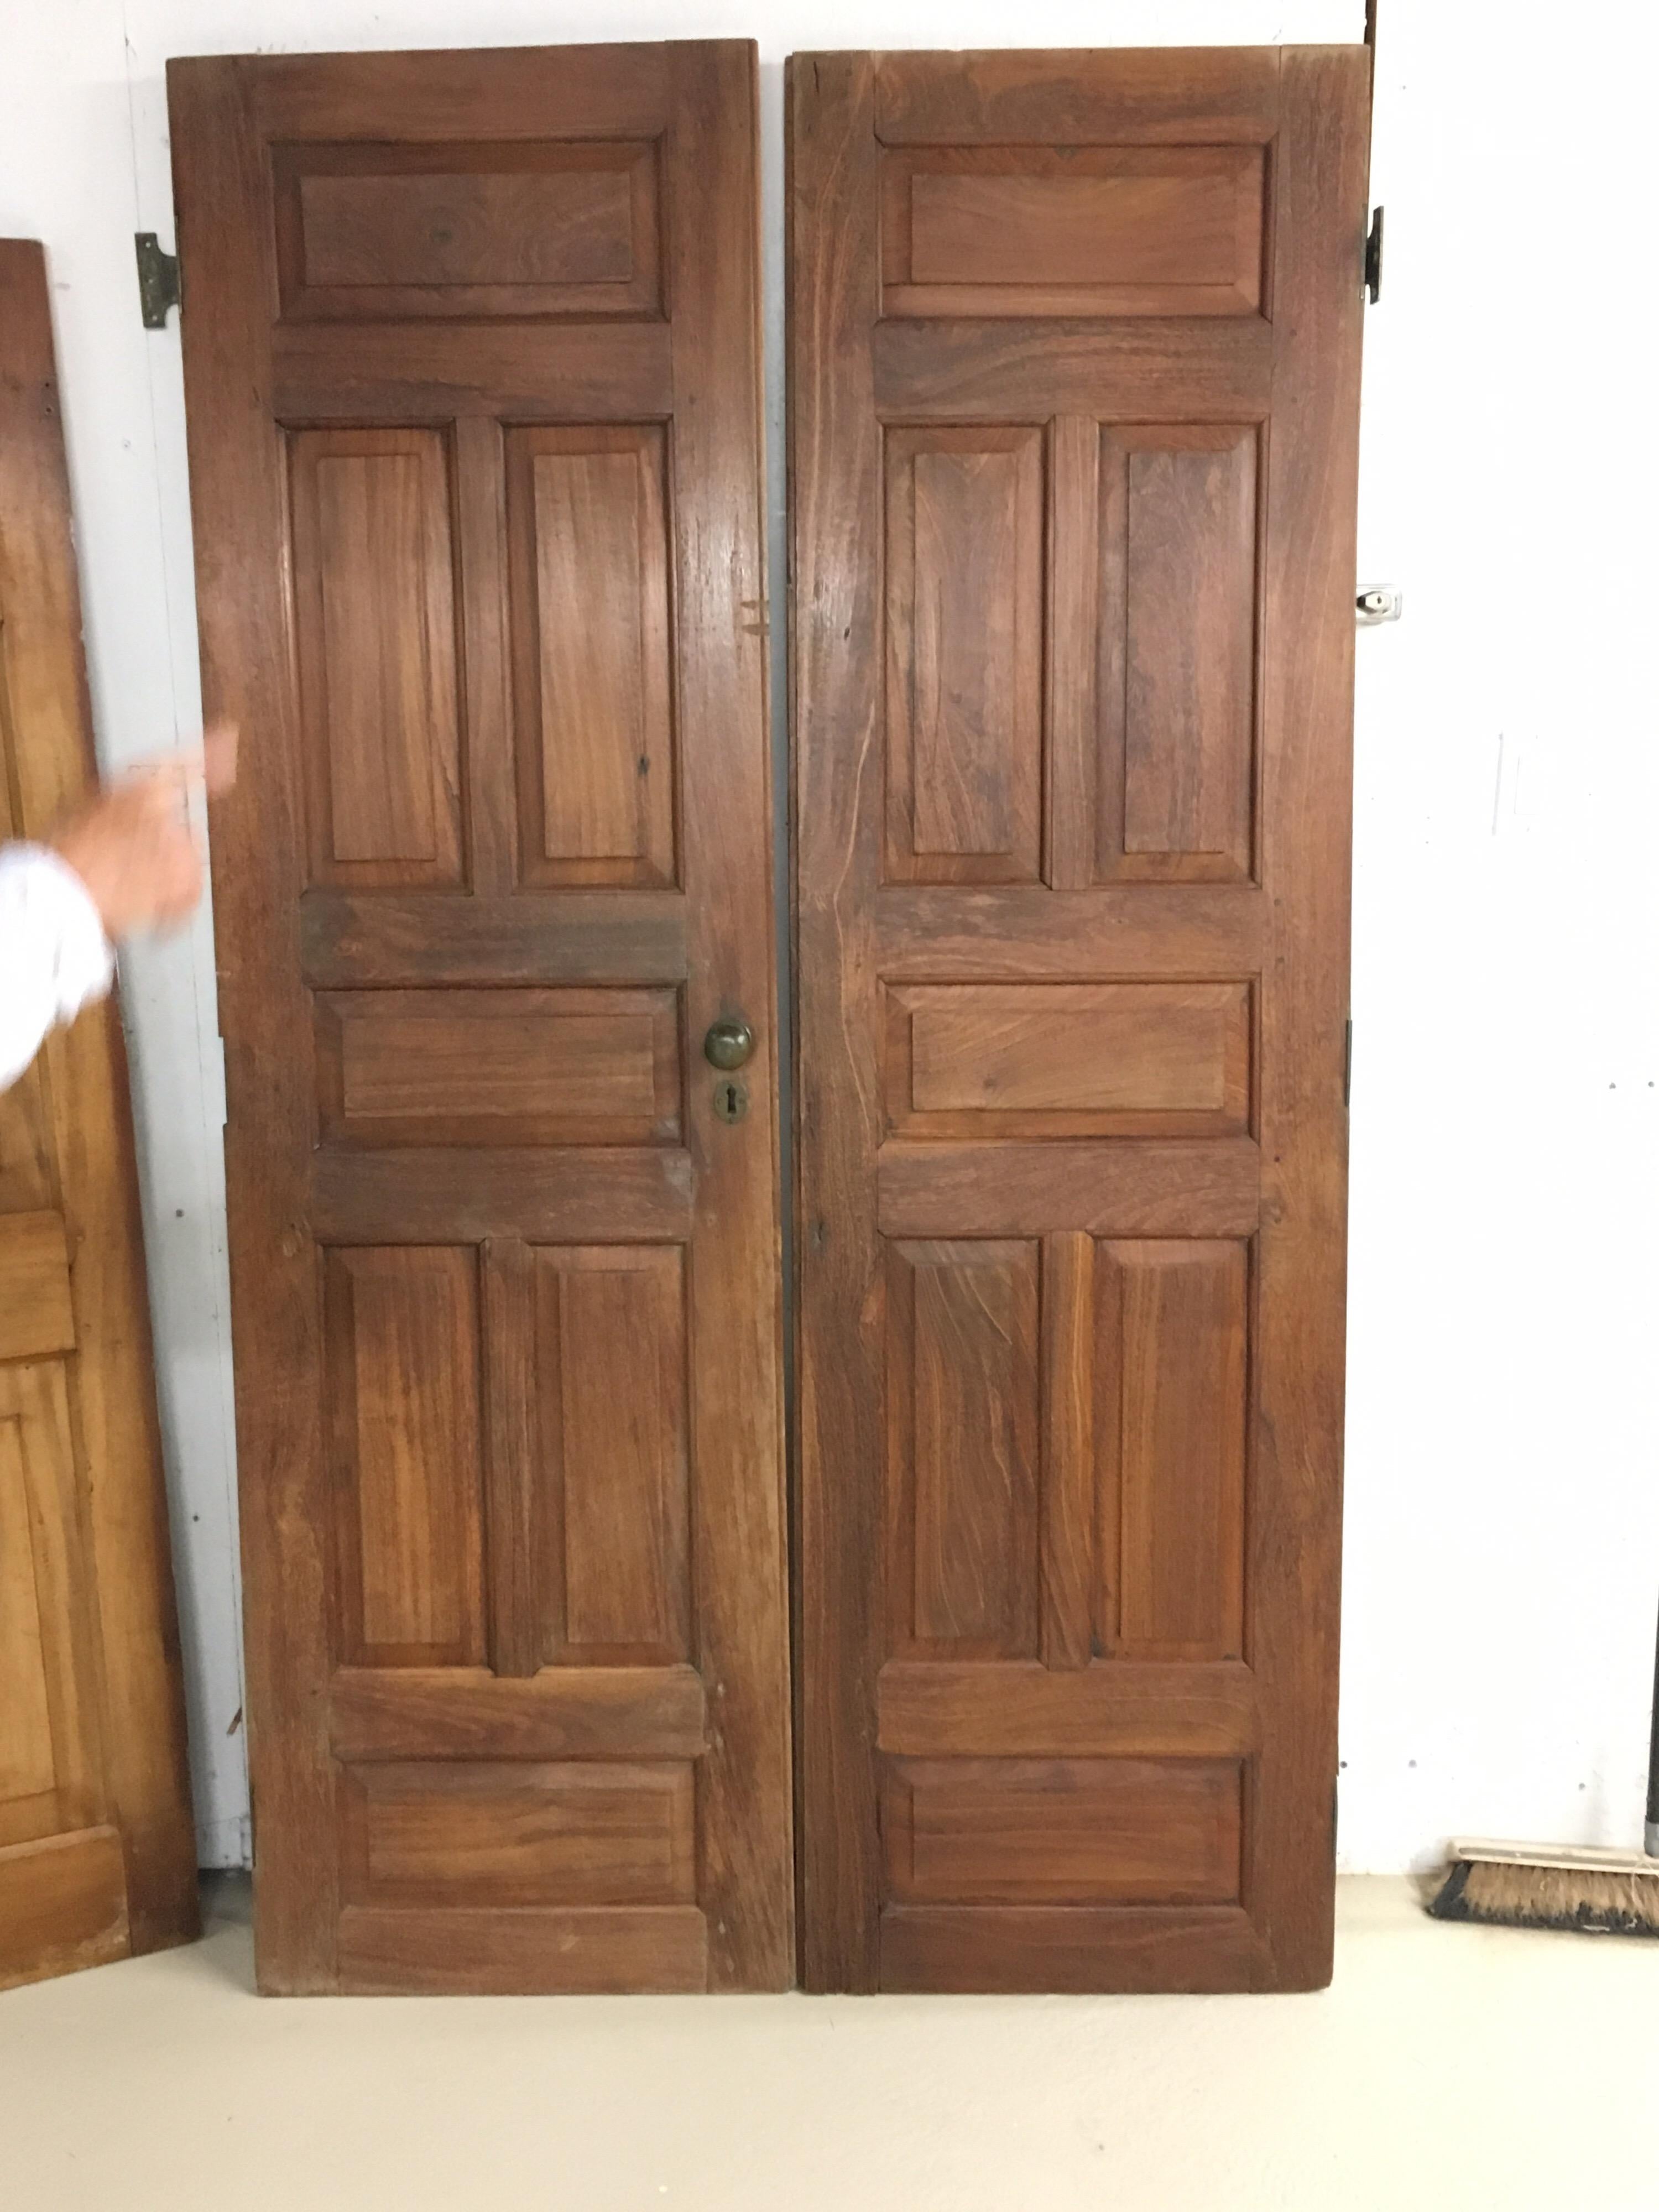 Pair of late 19th century Ceylonese solid rosewood Paneled doors, circa 1890s. Beautiful doors with original hardware. Doors meet and join together. Solid rosewood and great patina from age and use.

Provenance: Harrington Estate, importers of